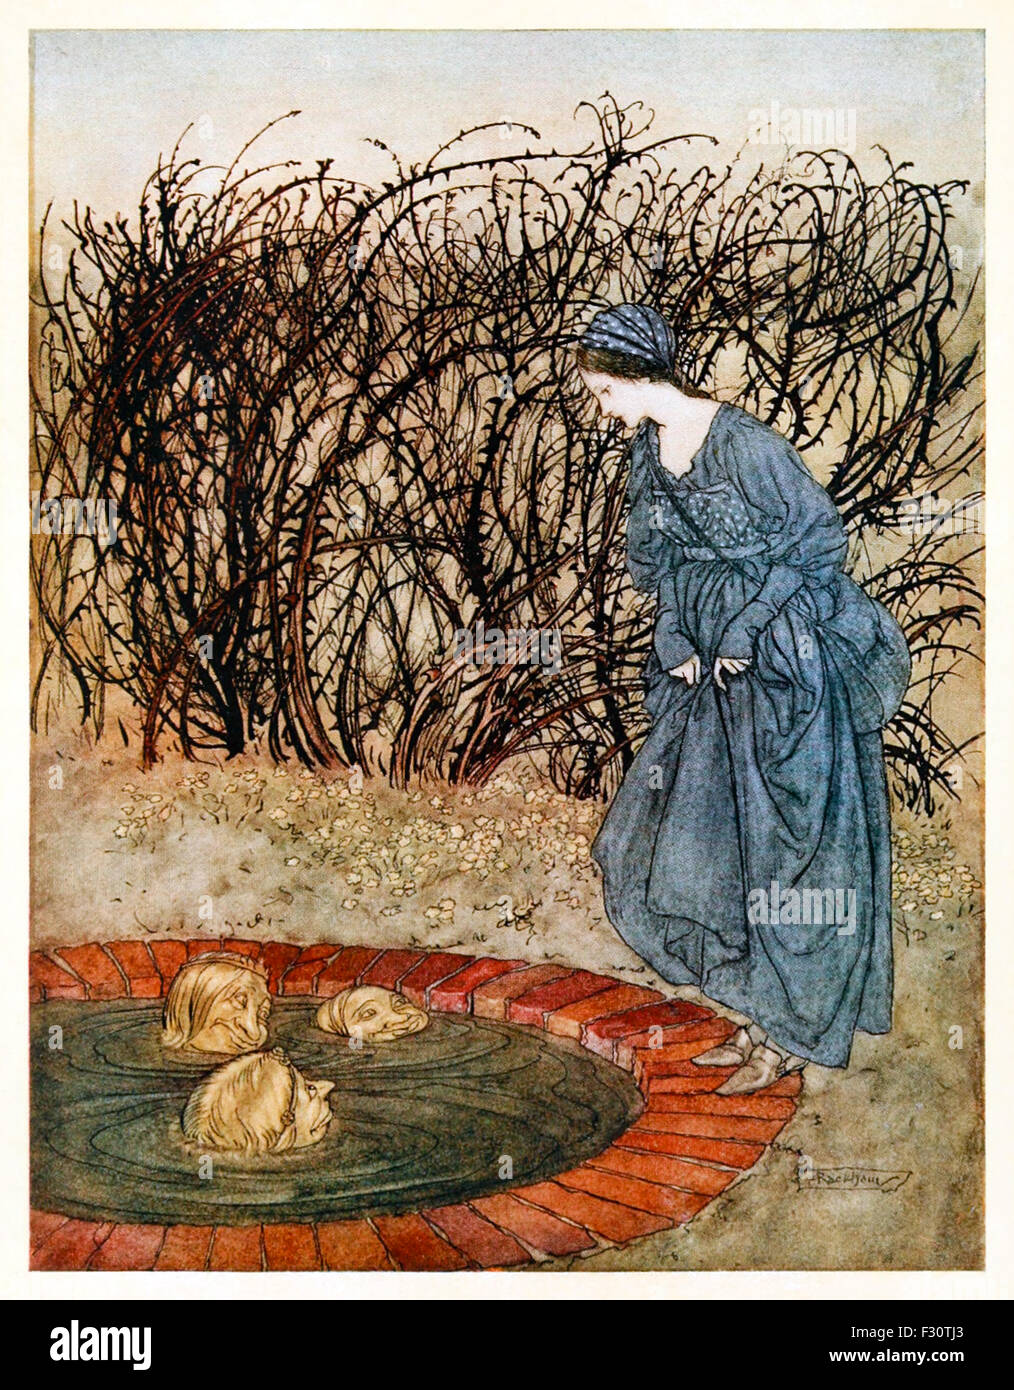 'They thanked her and said good-bye, and she went on her journey.' from 'The Three Heads of the Well' in 'English Fairy Tales', illustration by Arthur Rackham (1867-1939). See description for more information. Stock Photo